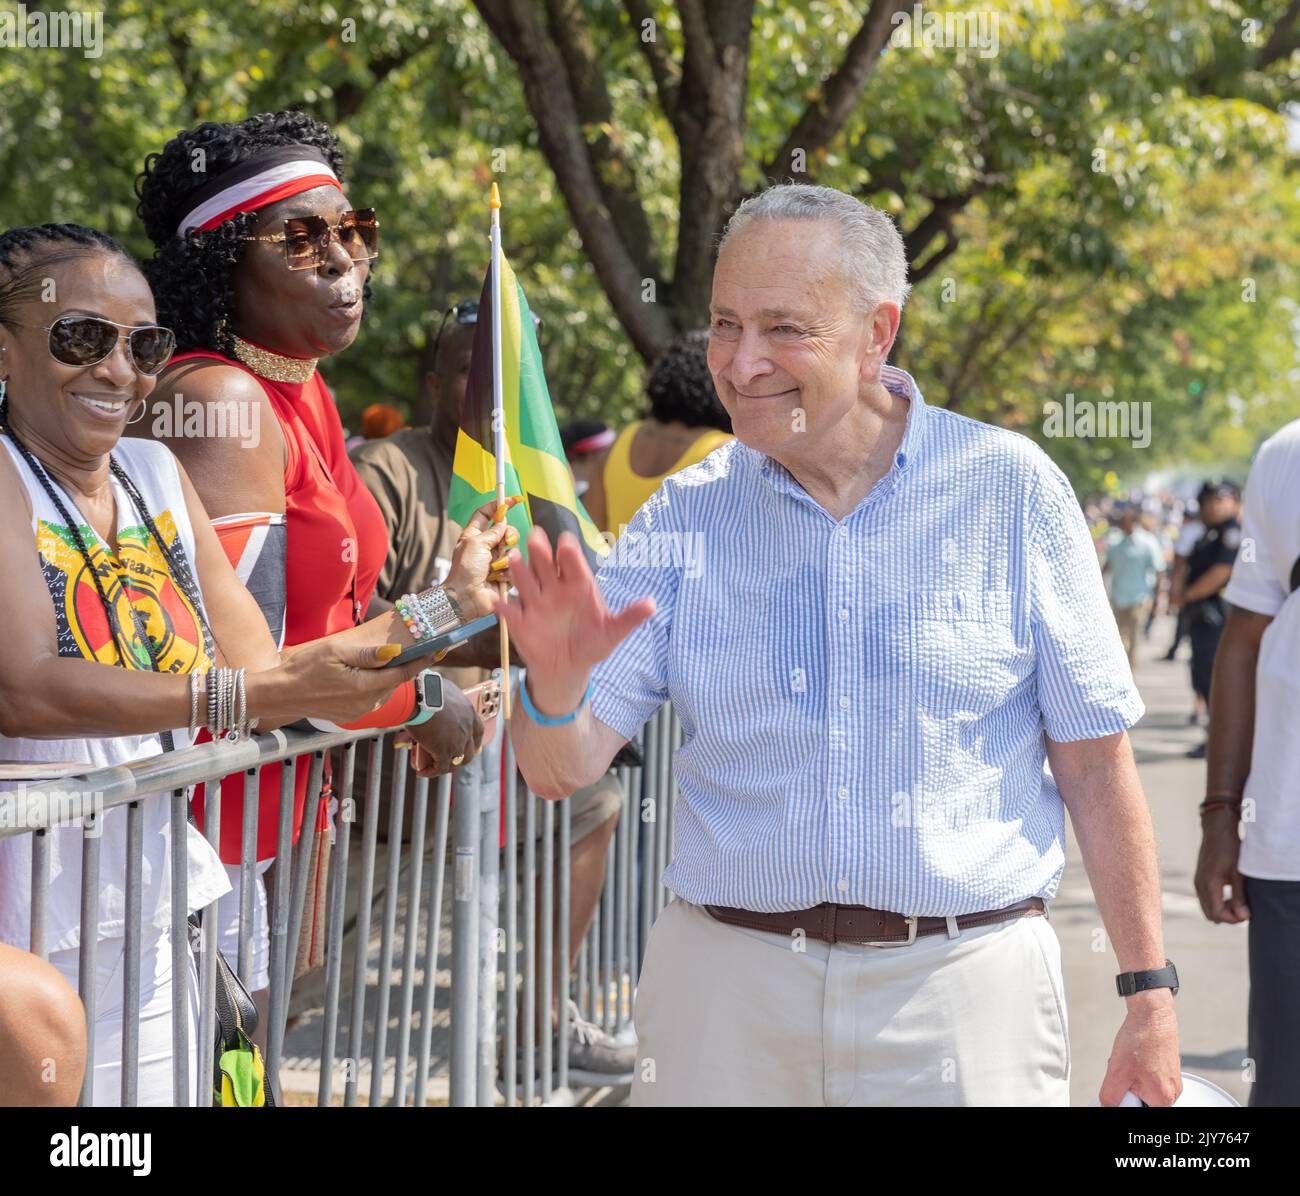 BROOKLYN, N.Y. – September 5, 2022: Senator Chuck Schumer (D-NY) greets spectators at New York City’s West Indian Day Parade. Stock Photo